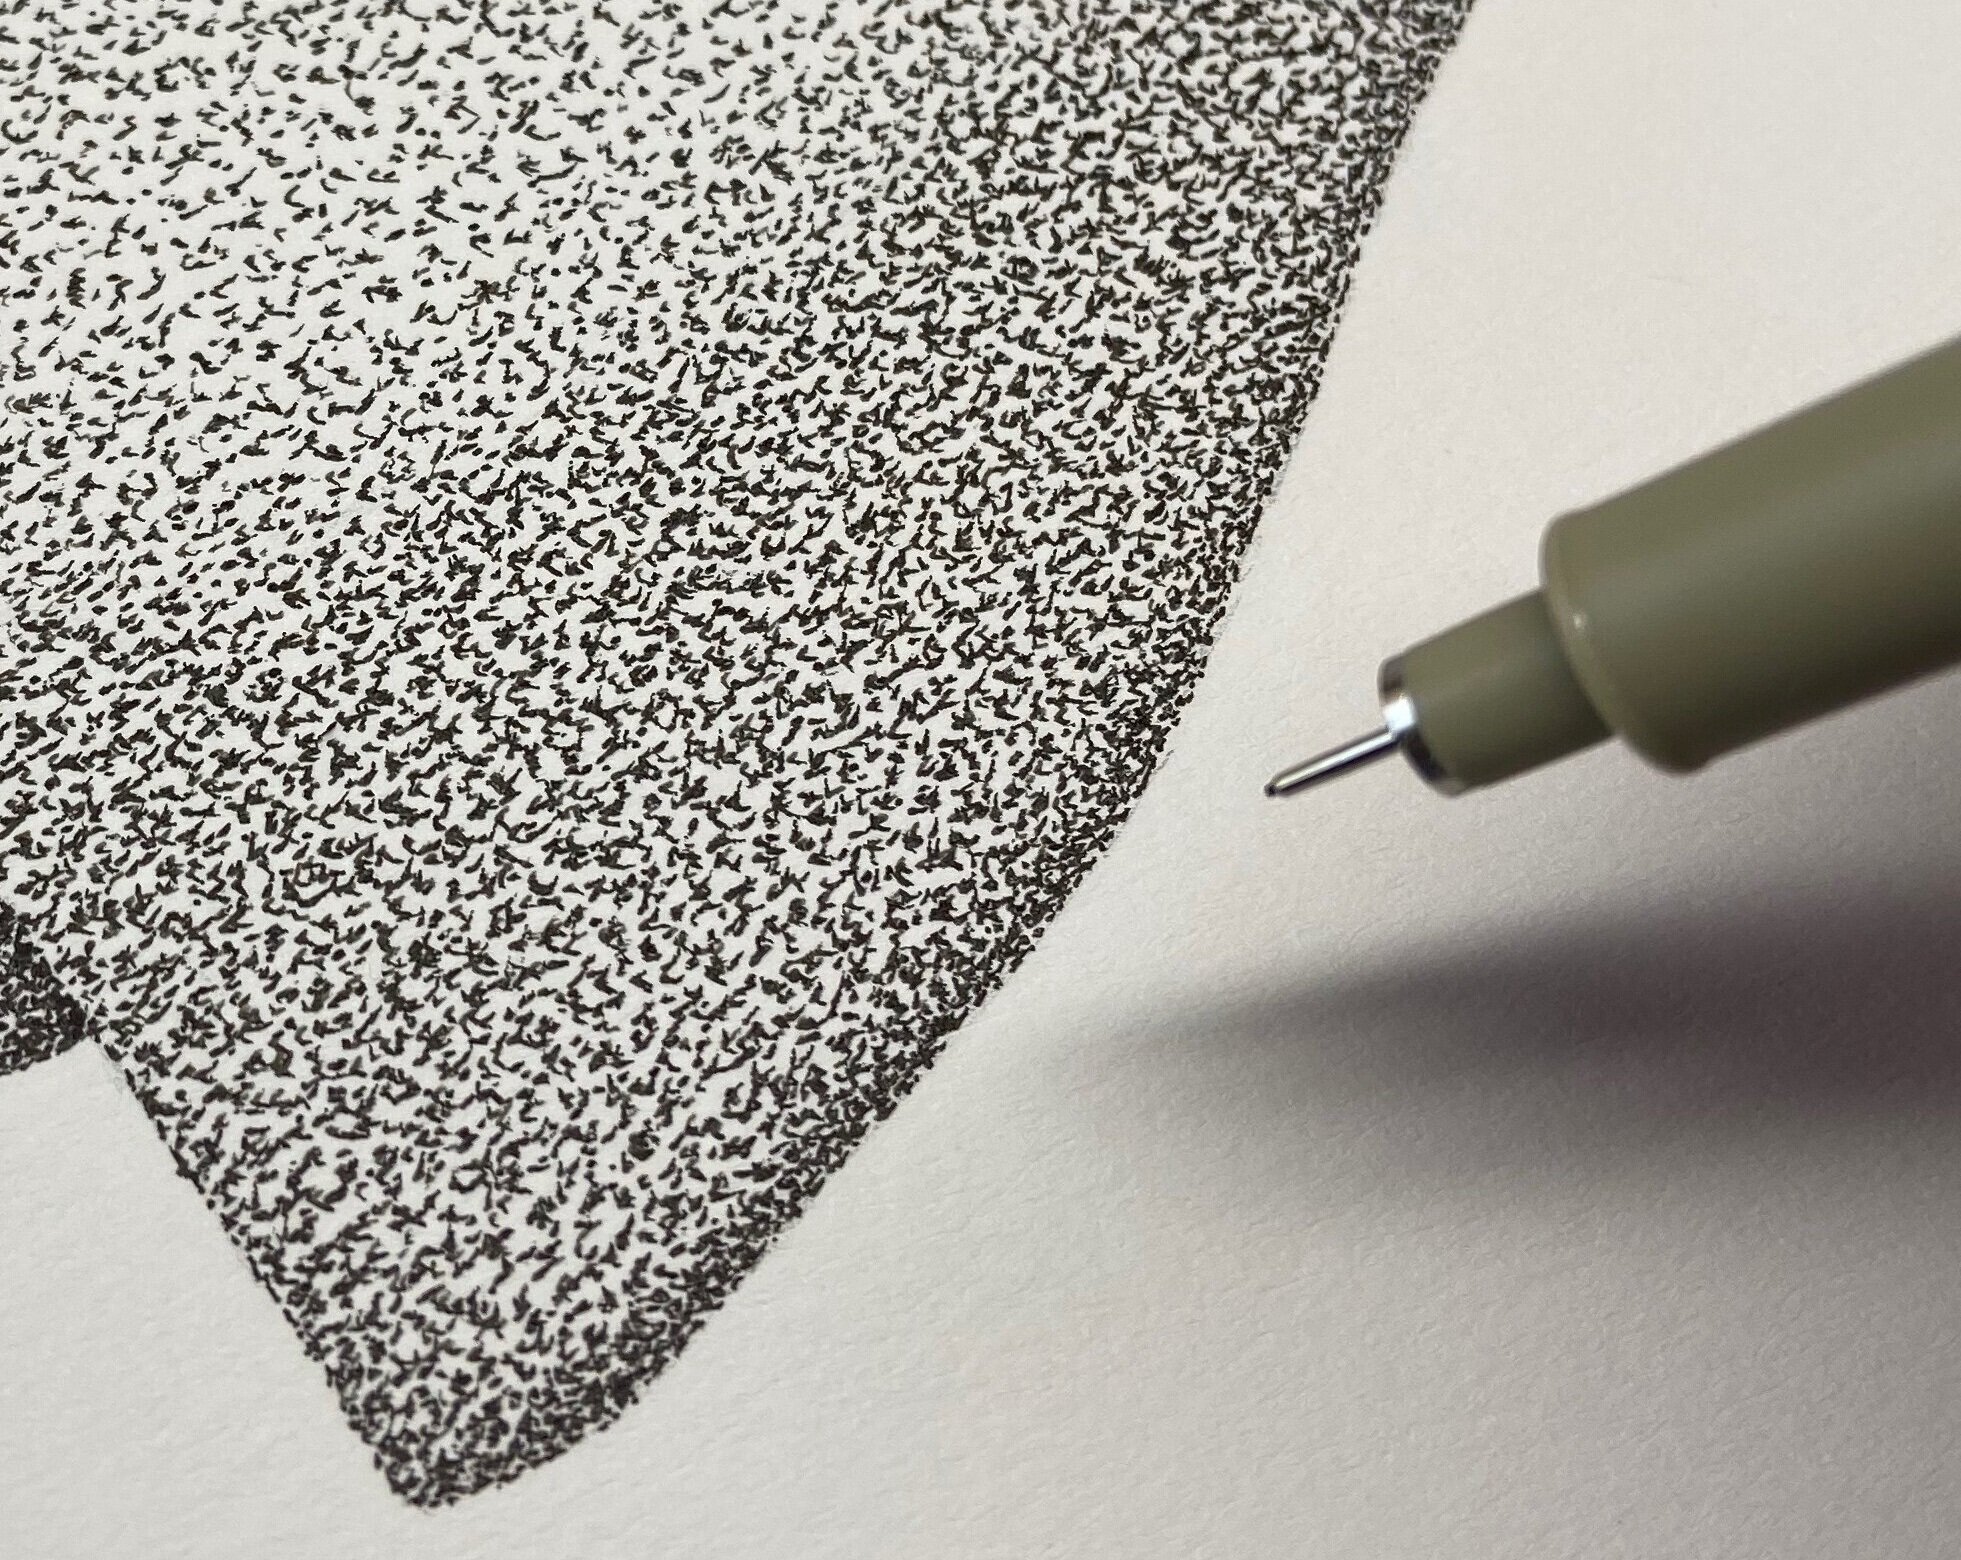 Stippling: Art and Drawing Technique